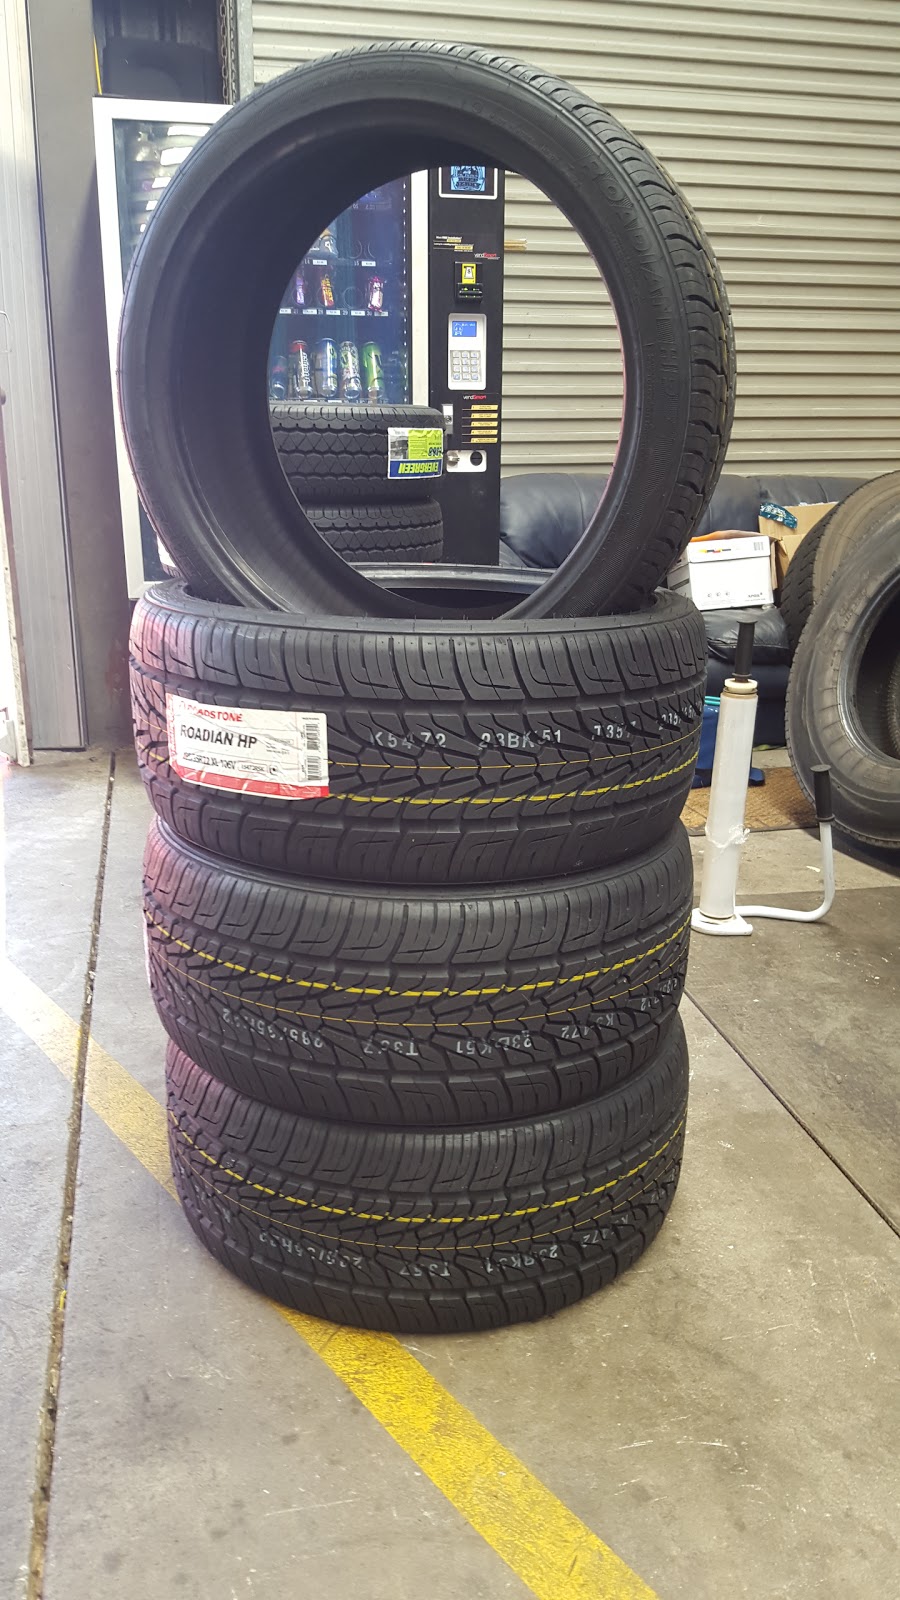 Wheel Change U - Mobile Tyre Fitting | car repair | 12/9 Springfield College Dr, Springfield QLD 4300, Australia | 0447083558 OR +61 447 083 558